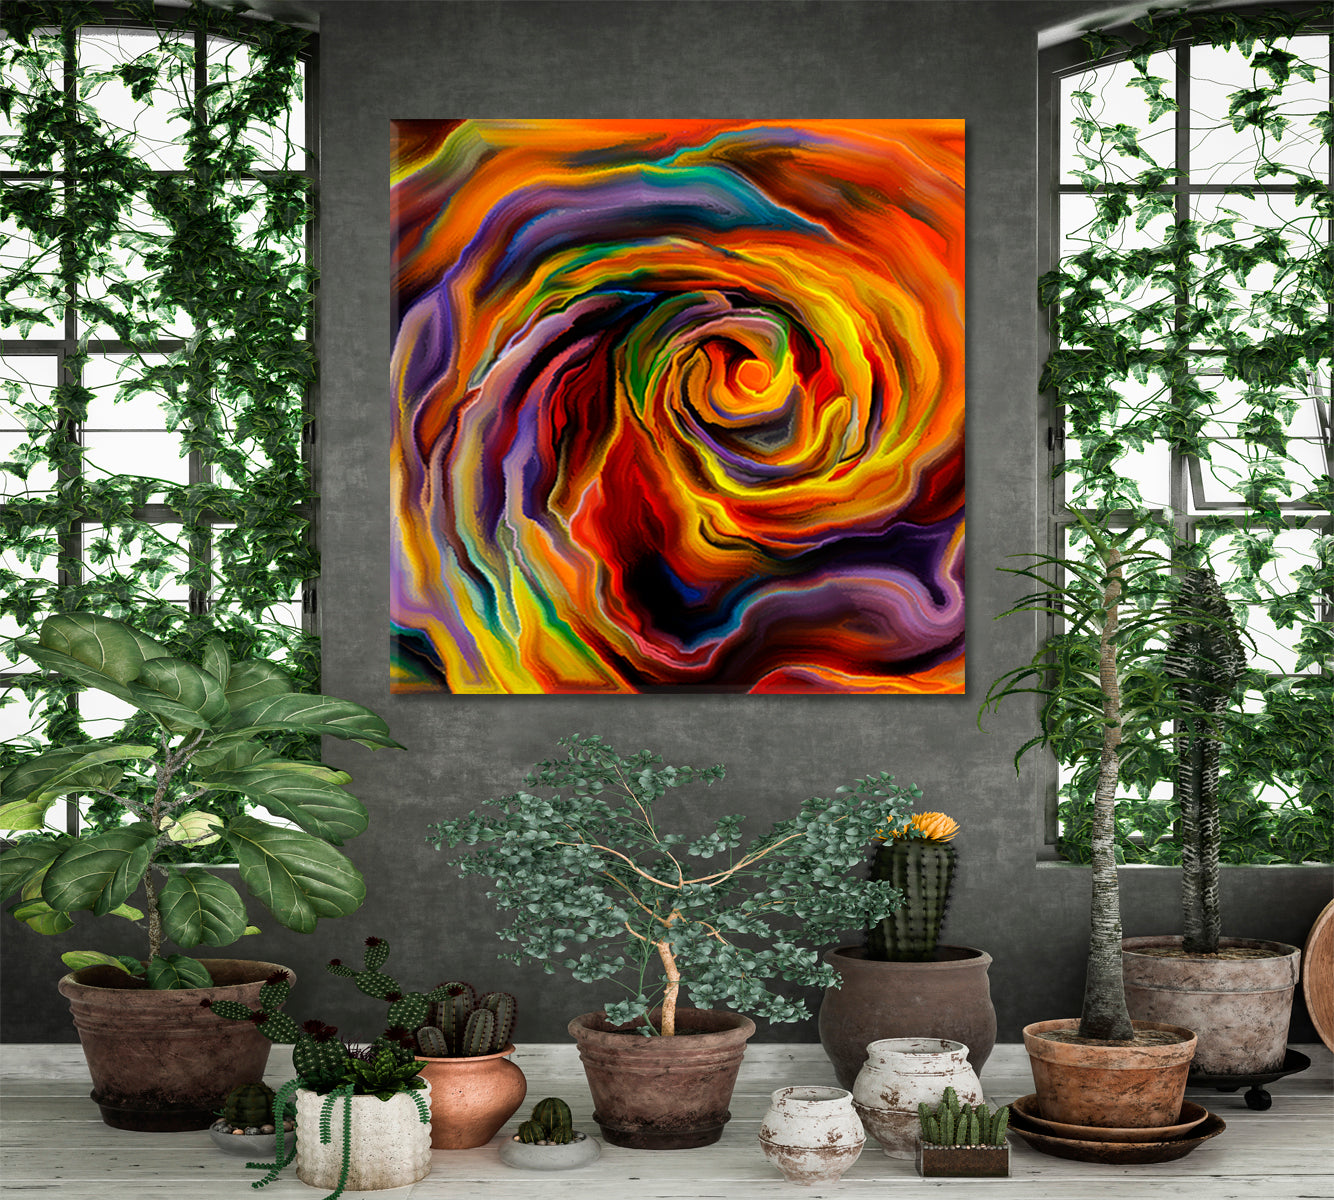 FORMS Magical Abstract Vivid Whirlpool - Square Panel Contemporary Art Artesty   